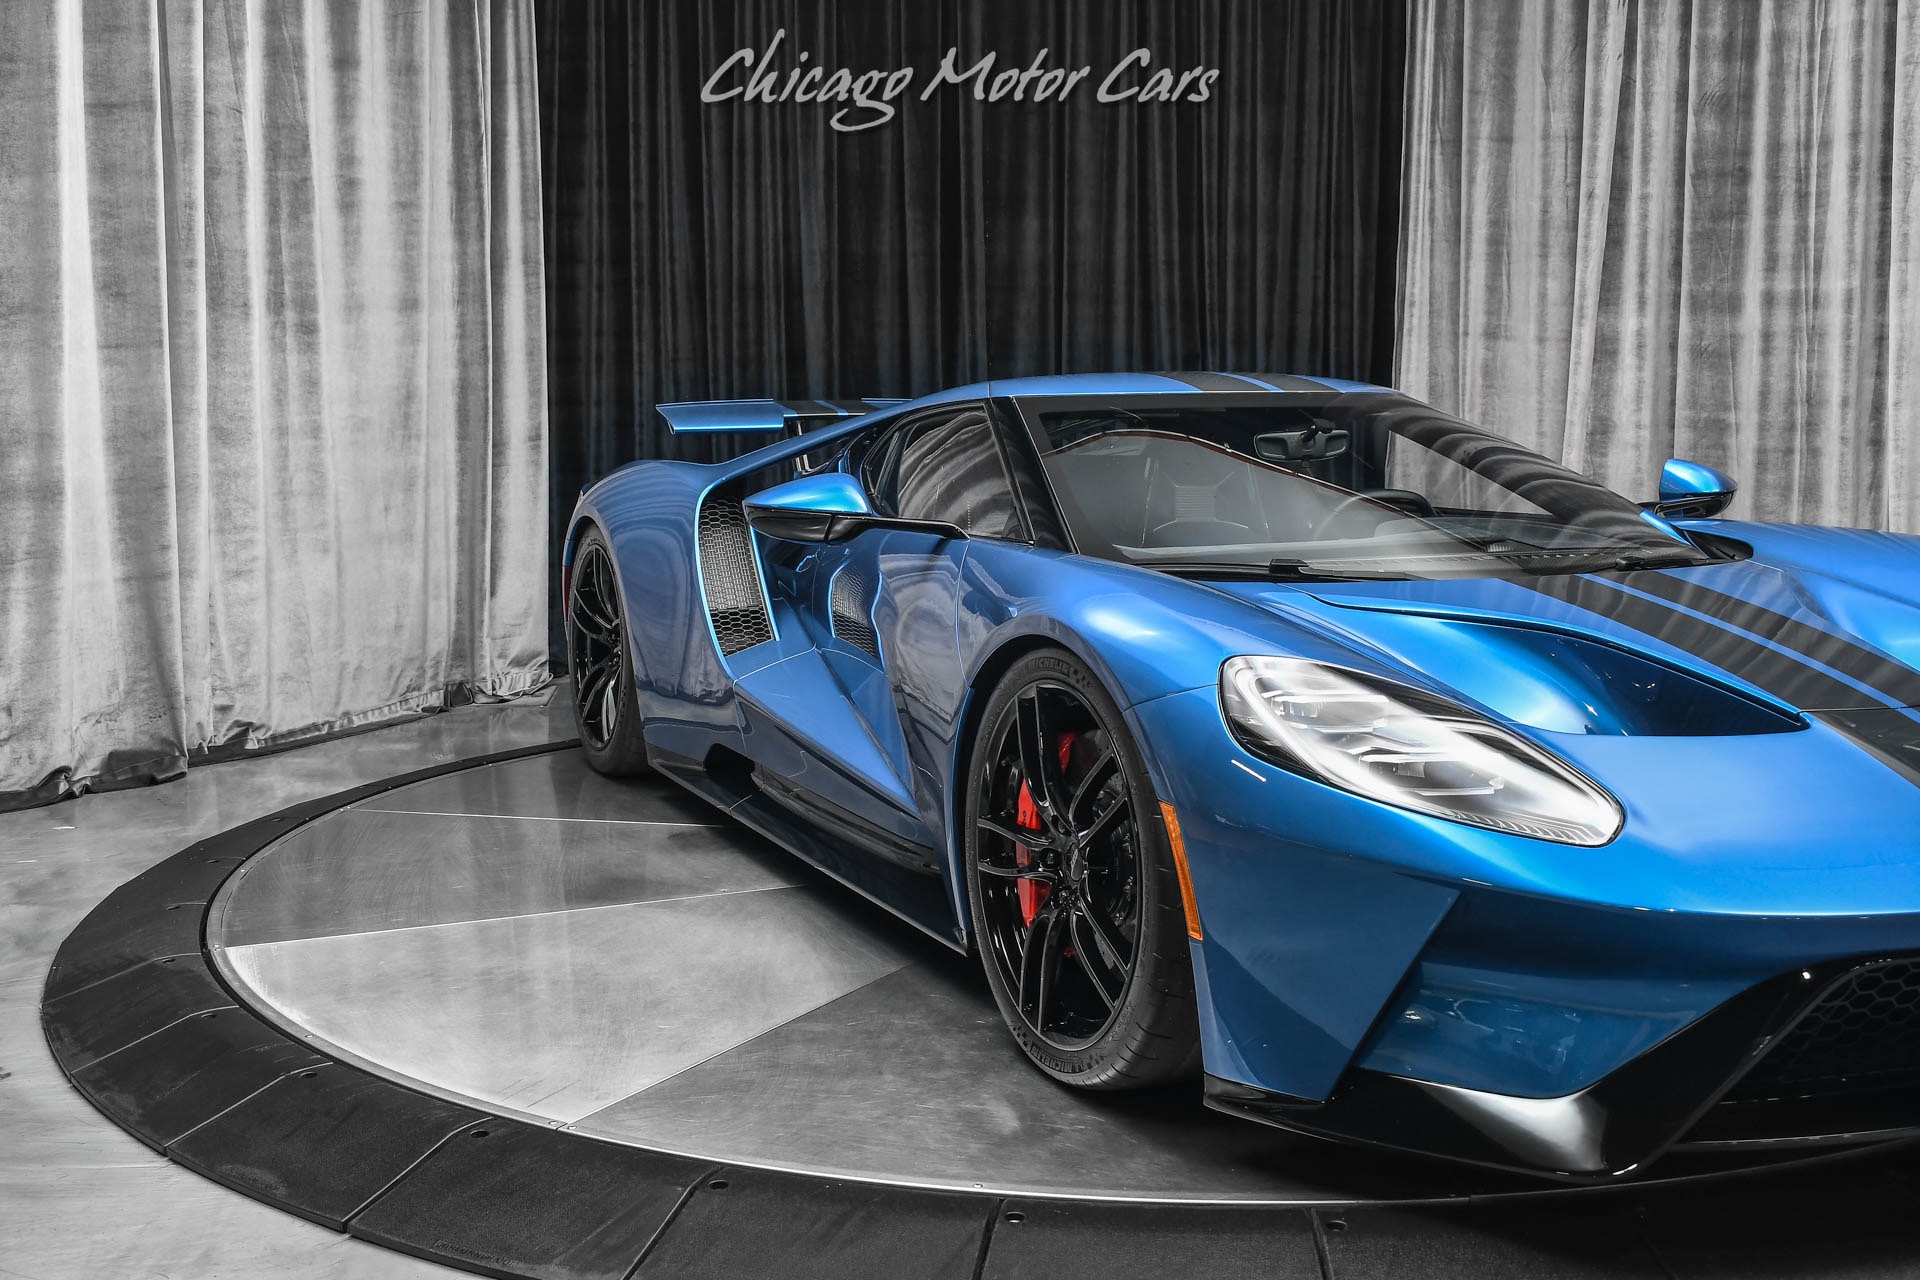 Used-2019-Ford-GT-Coupe-ONLY-1K-Miles-Liquid-Blue-Overtop-Stripes-FULL-PPF-LOADED